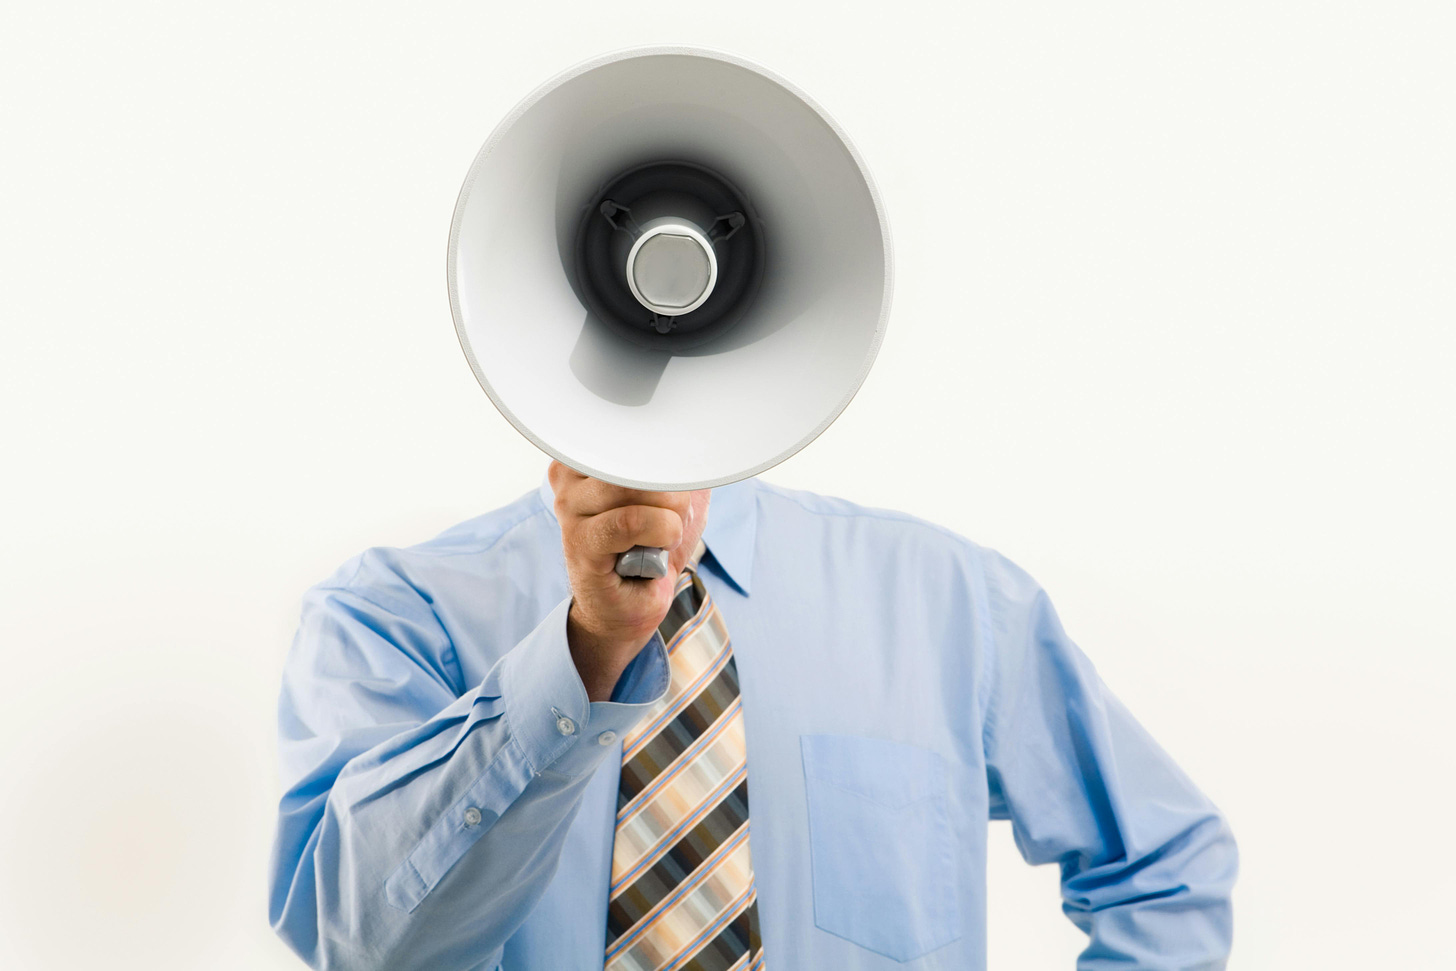 A person wearing a blue dress shirt and yellow and black tie holding a megaphone that obscures their face.